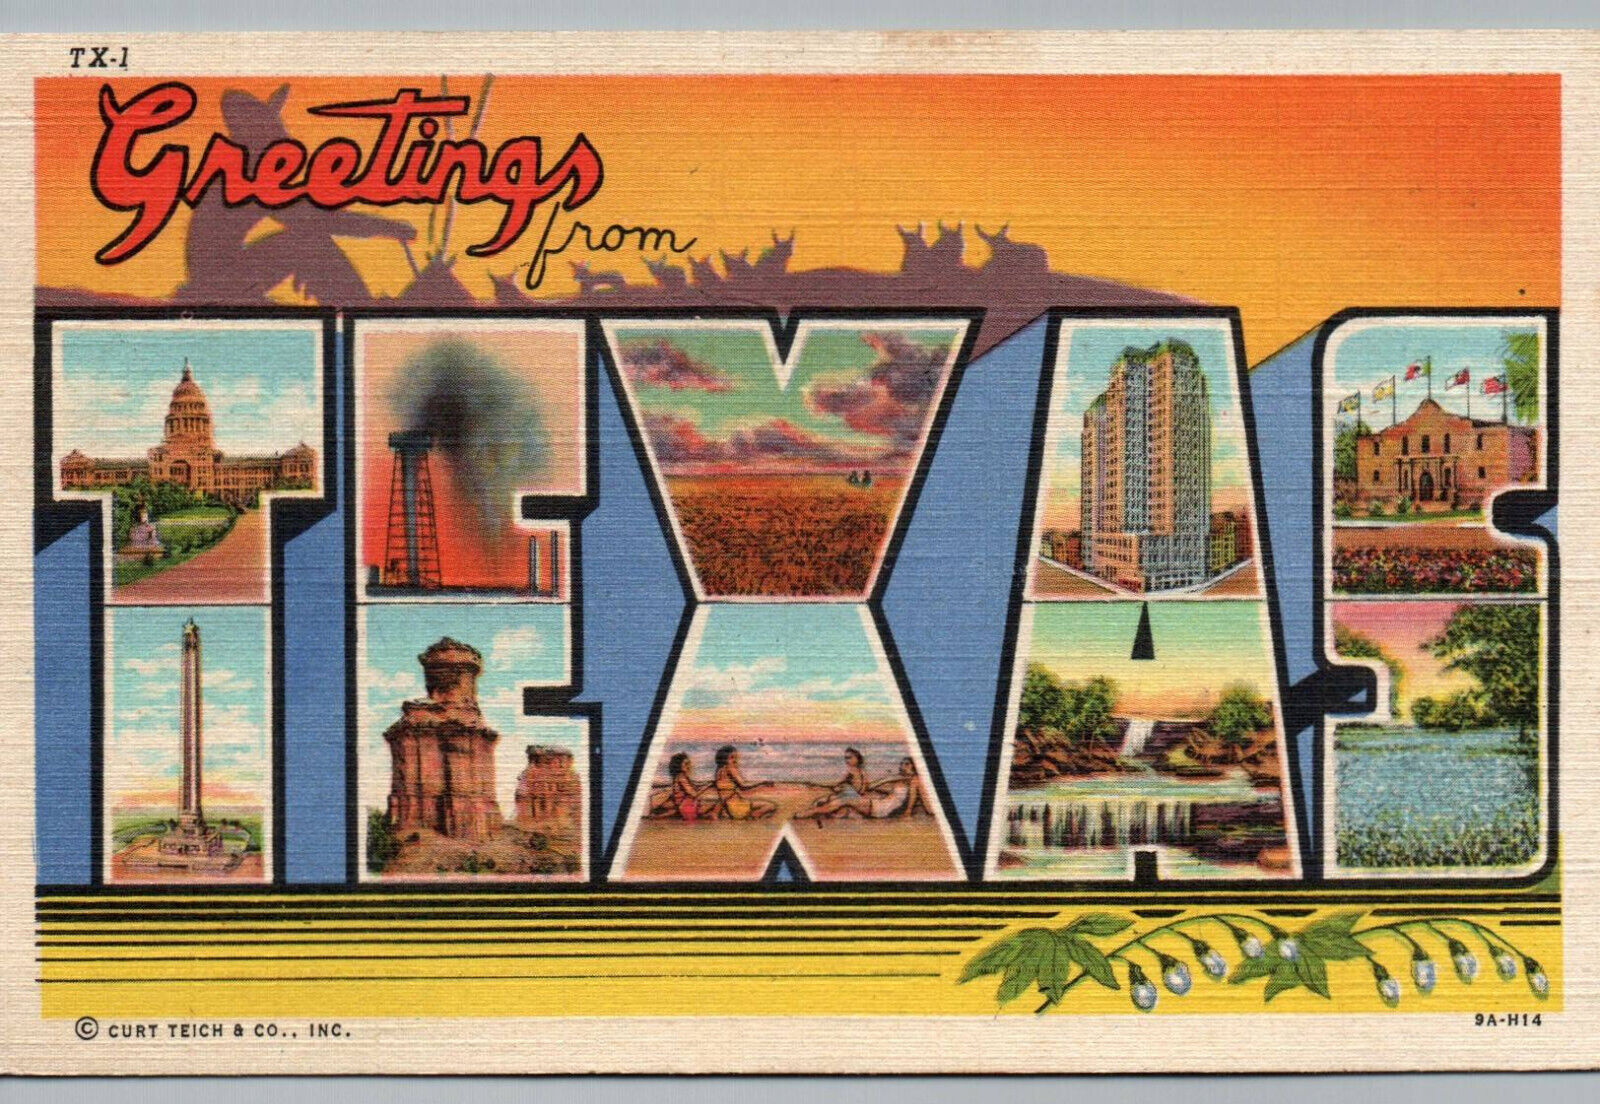 Texas Postcard Vintage Greetings from Large Big Letter Linen TX Curt Teich Poste